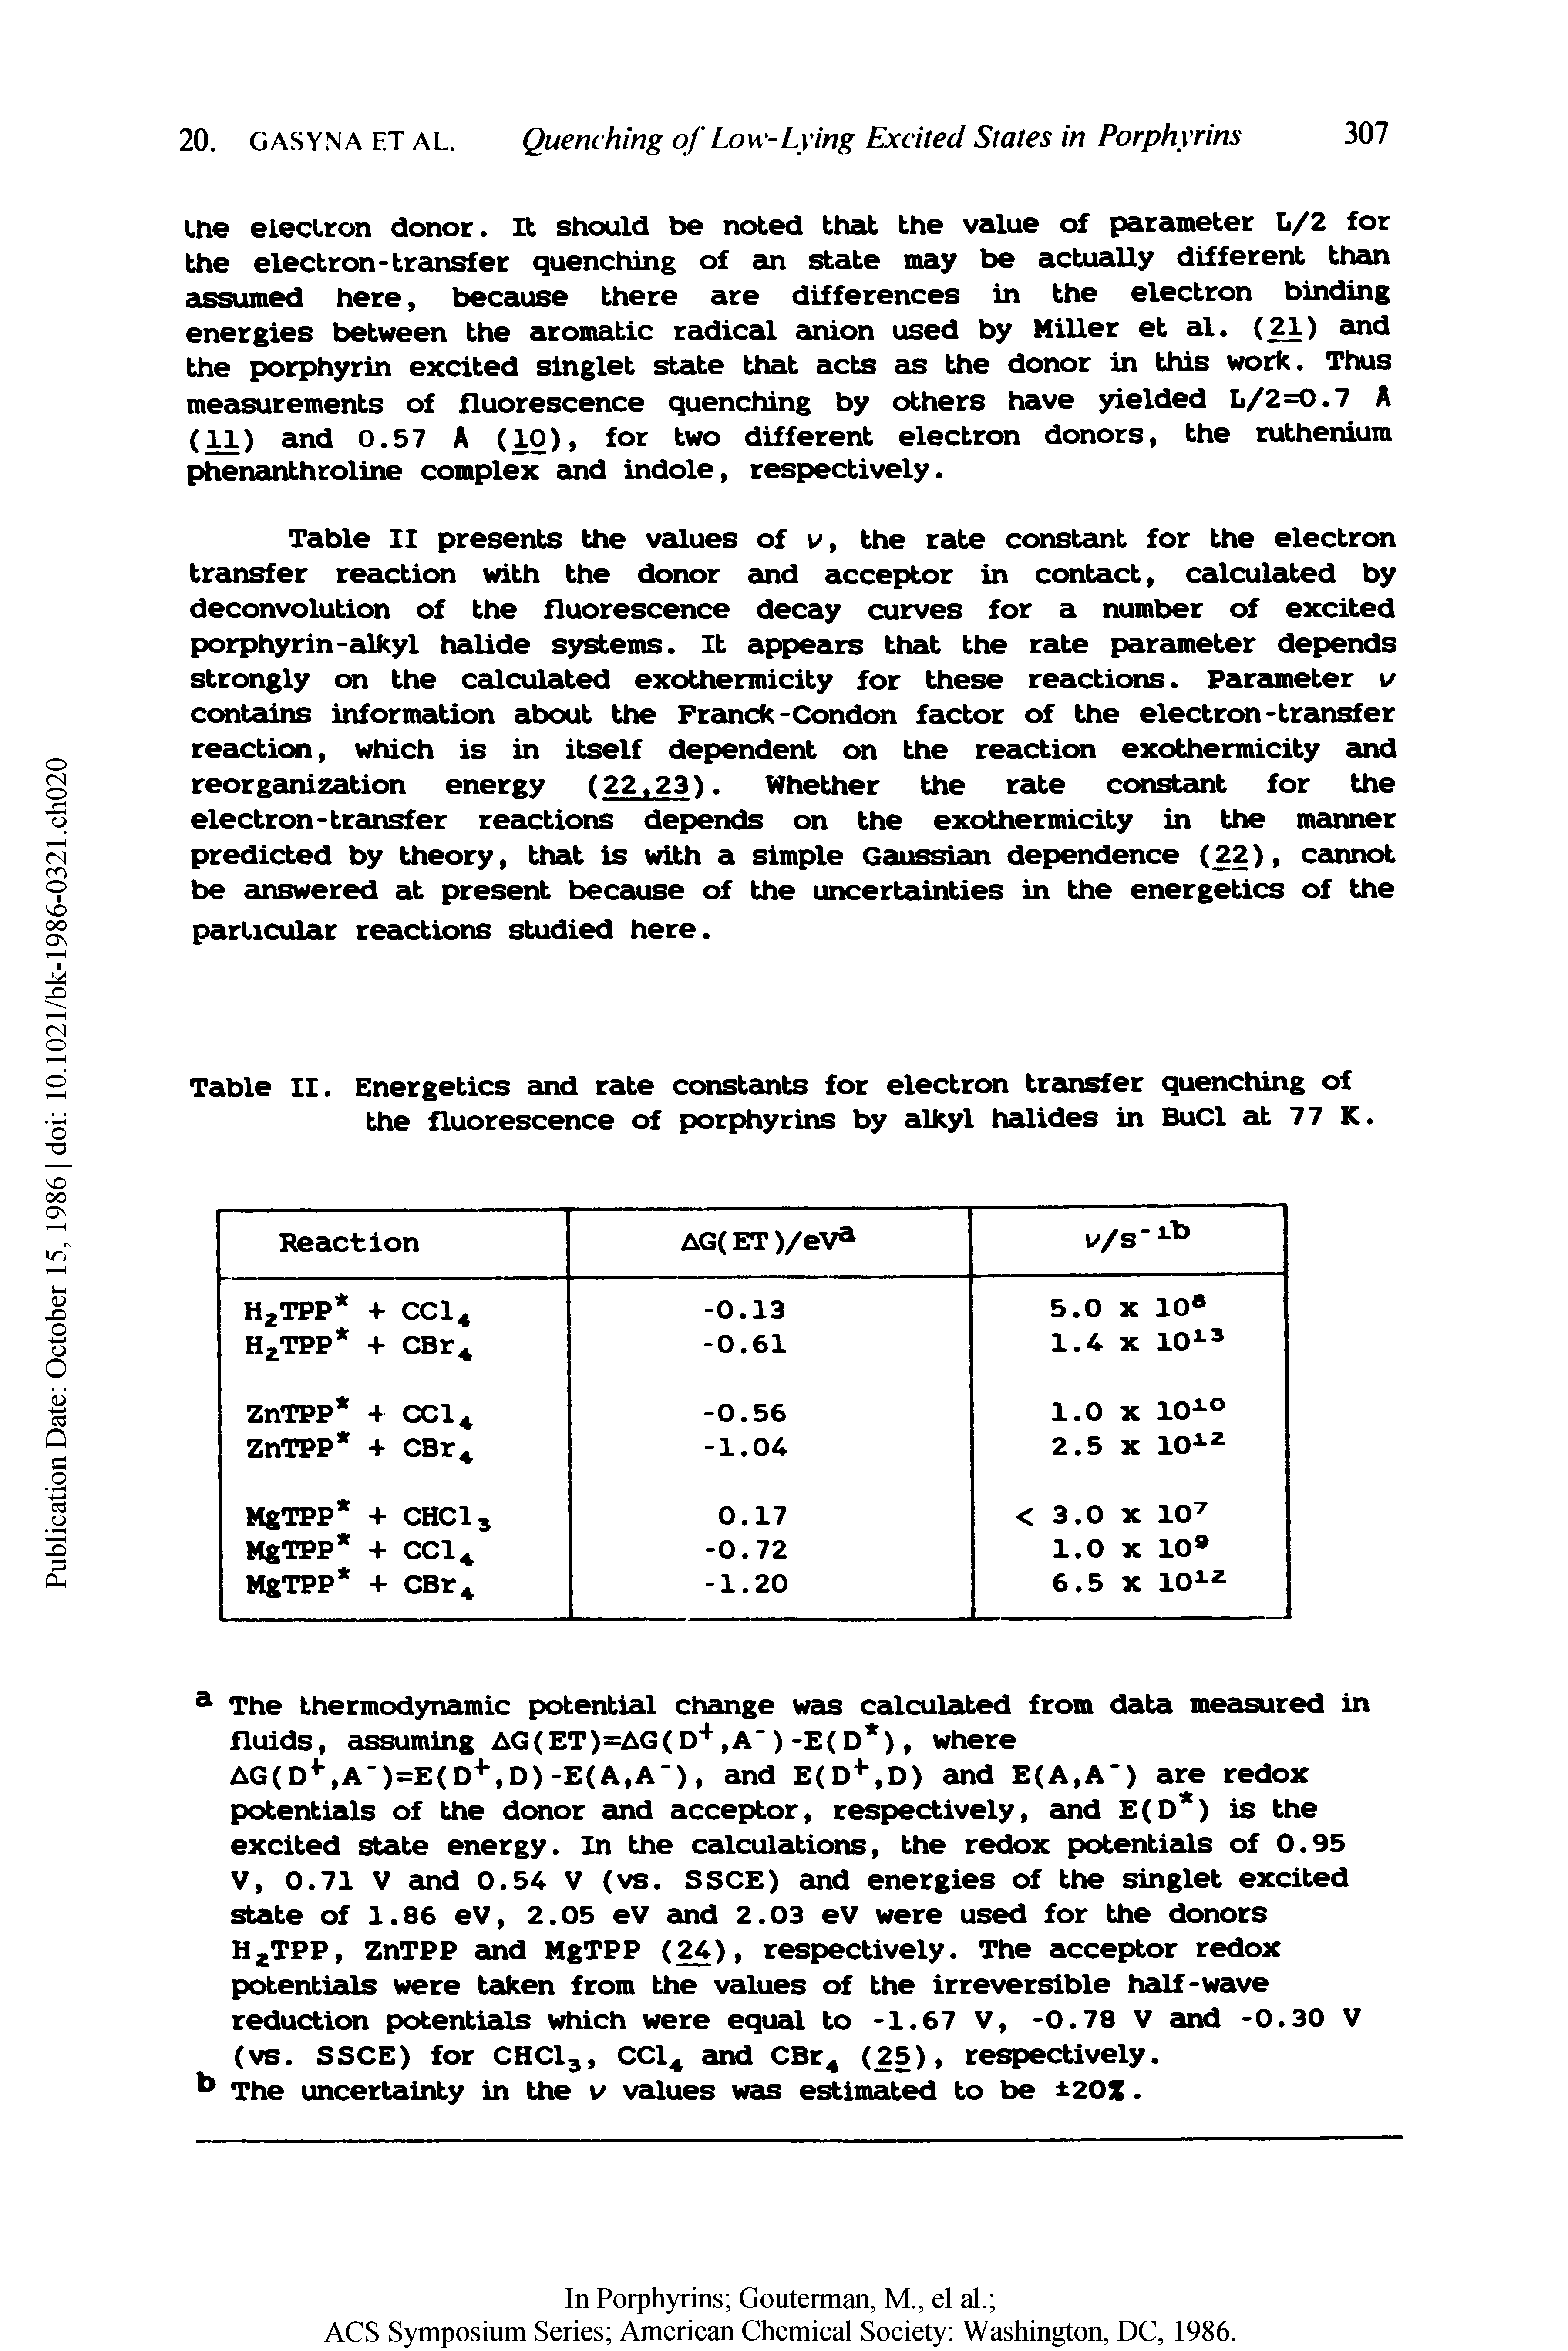 Table II presents the vadues of v, the rate constant for the electron transfer reaction with the donor and acceptor in contact, calculated by deconvolution of the fluorescence decay curves for a number of excited porphyrin-cOkyl halide systems. It appears that the rate parauneter depends strongly on the calculated exothermicity for these reactions. Parauneter i/ contadns information about the Framck-Condon factor of the electron-tramsfer reaction, which is in itself dependent on the reaction exothermicity and reorgauiization energy (22.23). Whether the rate constauit for the electron-transfer reactions depends on the exothermicity in the manner predicted by theory, that is with a simple Gaussian dependence (22), cannot be ainswered at present because of the uncertainties in the energetics of the particular reactions studied here.